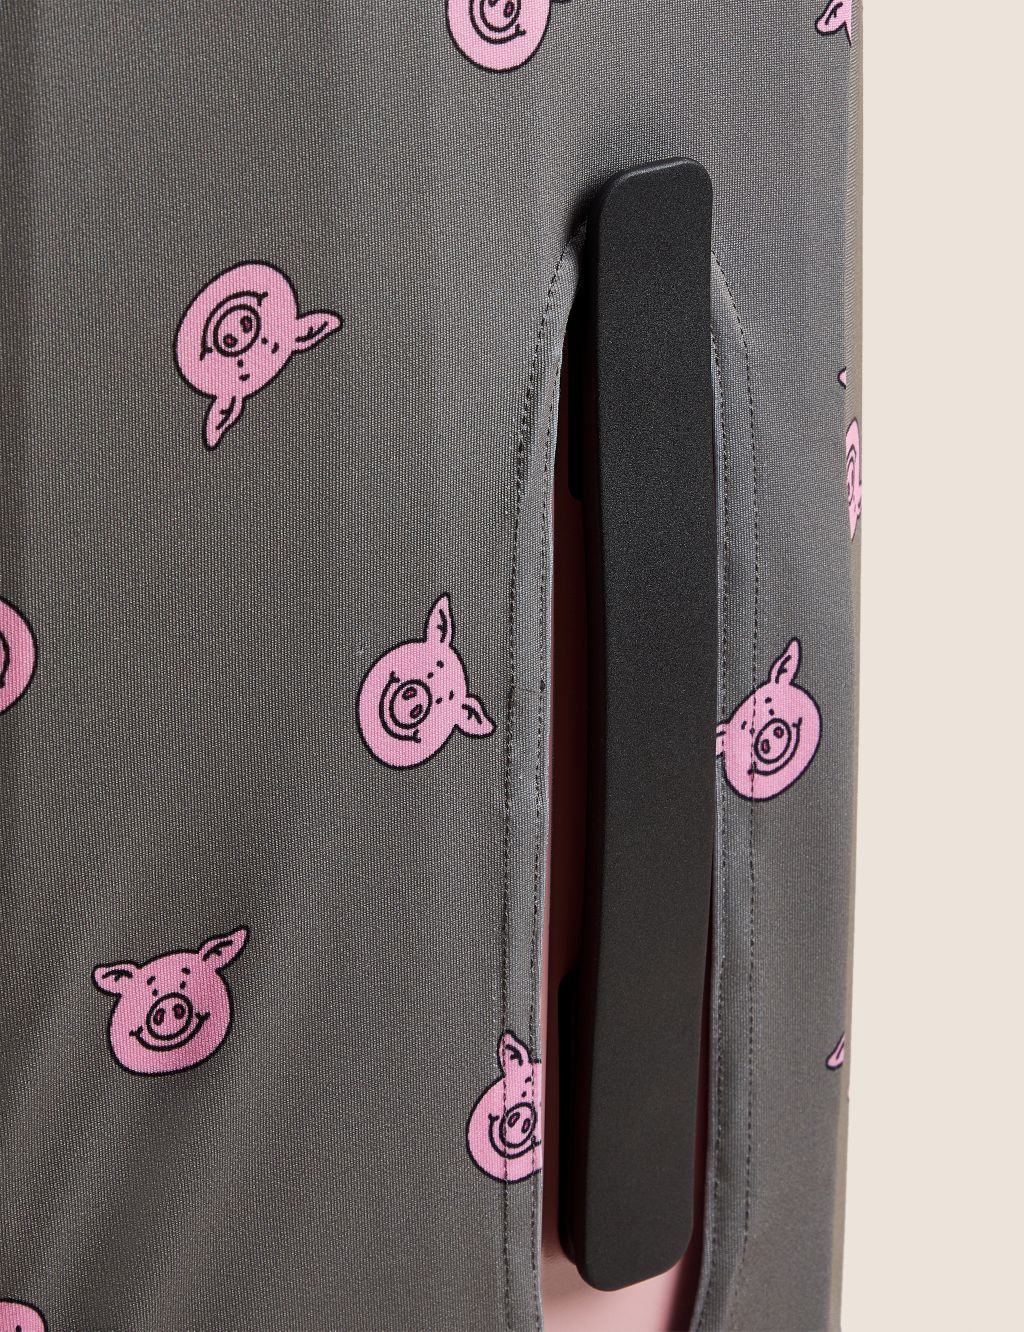 Percy Pig™ Suitcase Cover image 4